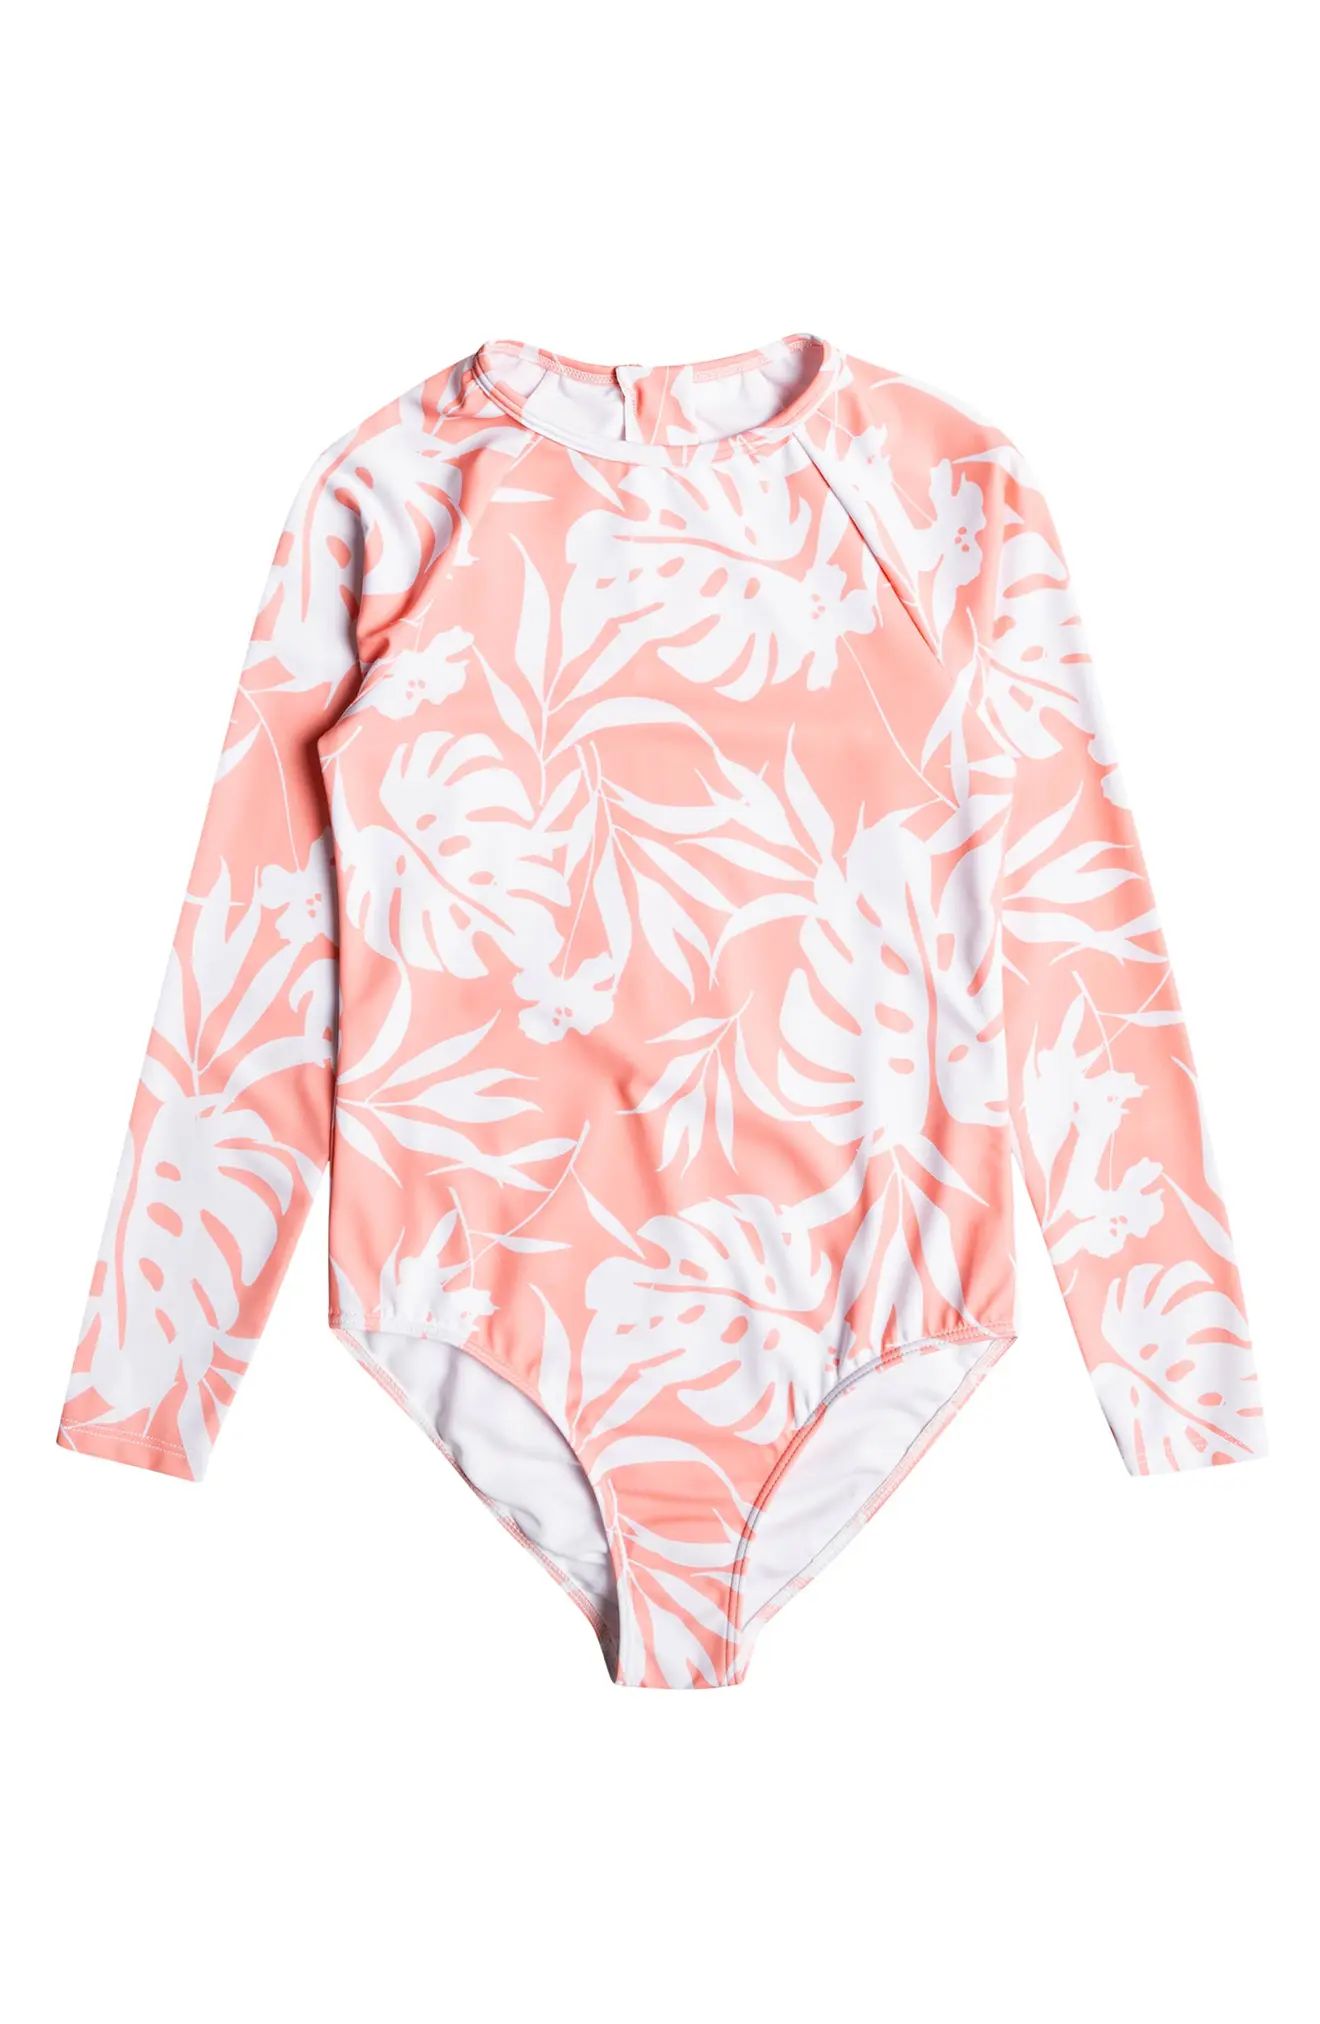 Roxy Kids' Flowers Long Sleeve One-Piece Rashguard Swimsuit in Pink at Nordstrom | Nordstrom